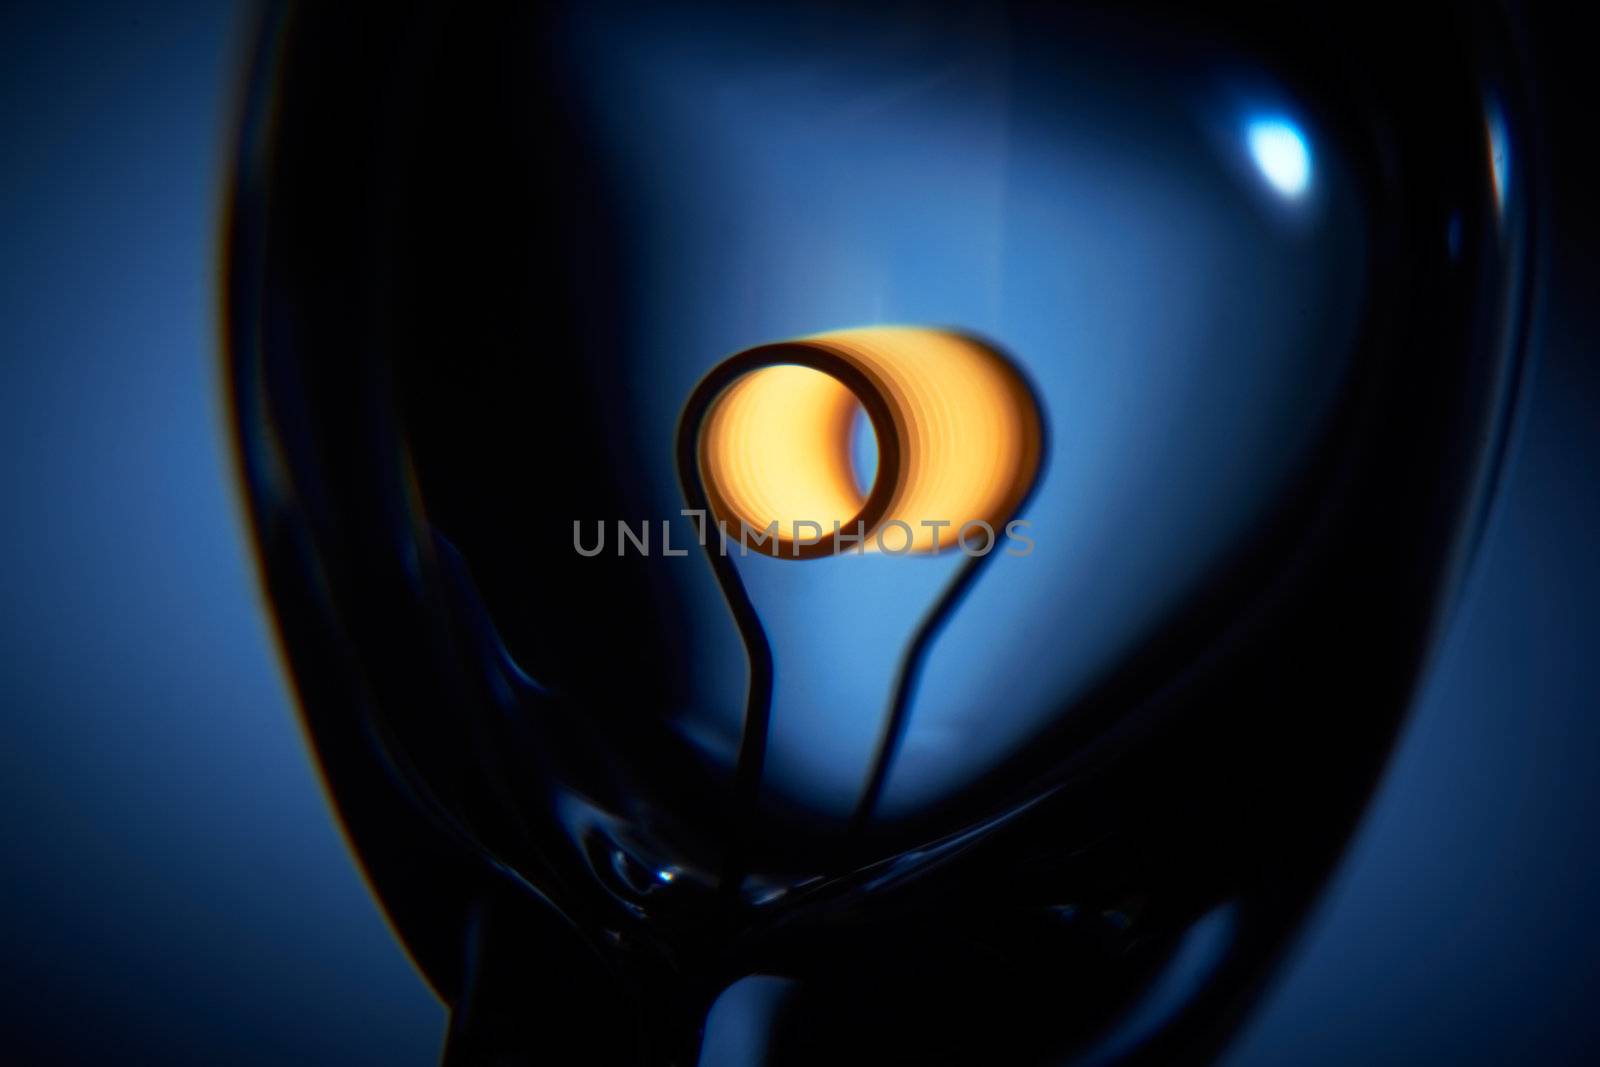 Glower is heated. Conceptual shot of incandescent lamp in blue. by pashabo